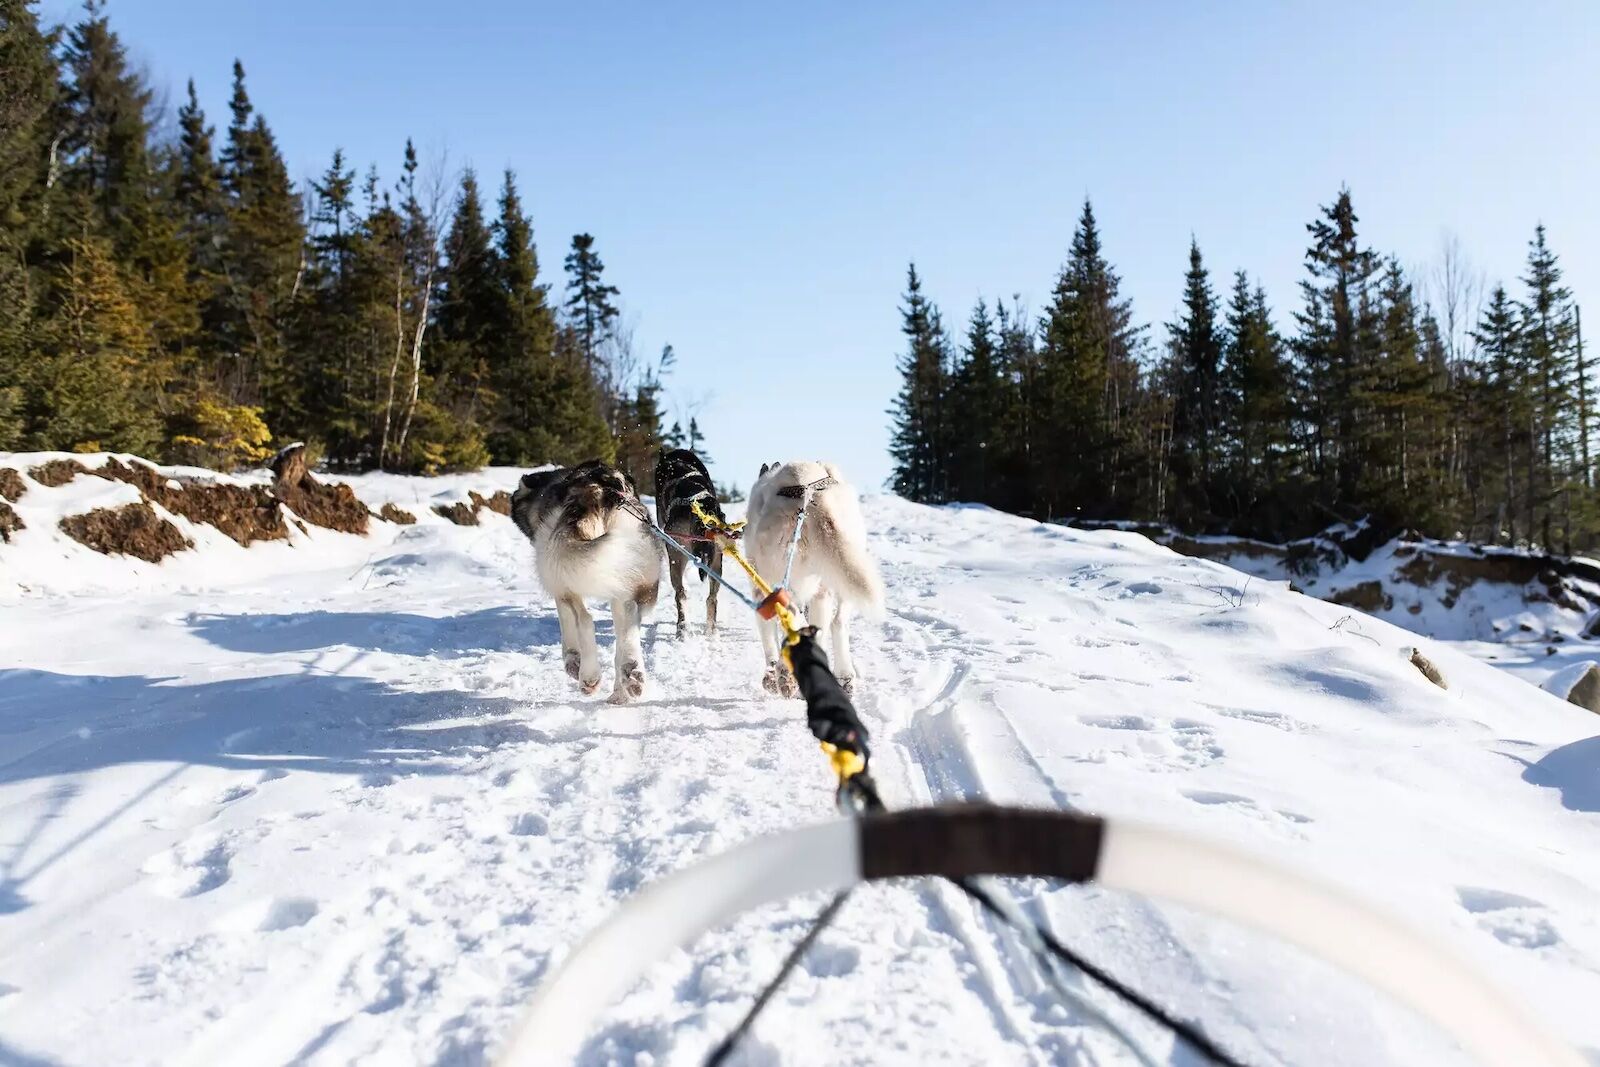 Passenger view while on a dog sled at Club Med Quebec